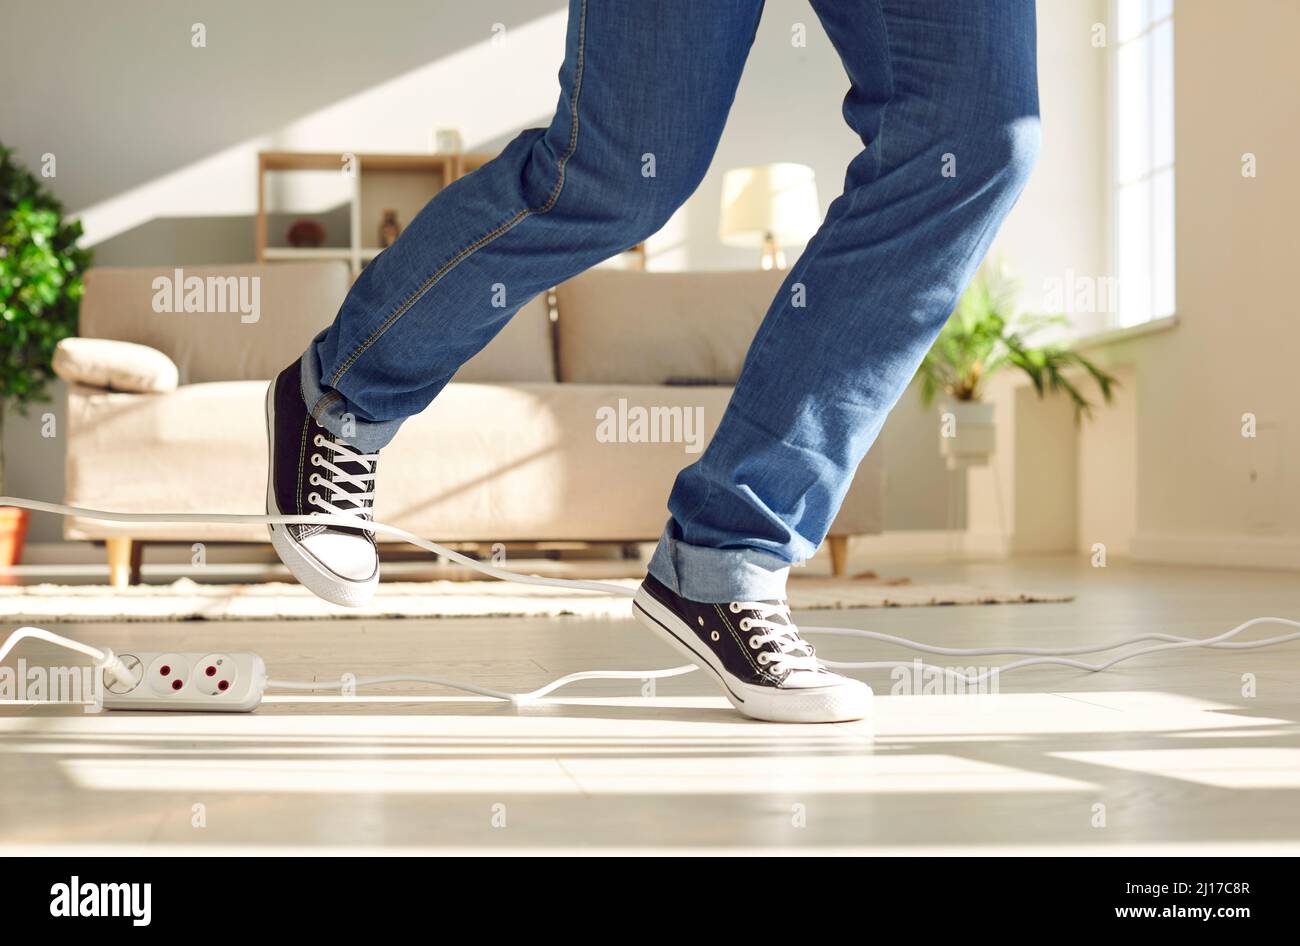 Young man tripping over a power cable at home, close up shot of his feet on the floor Stock Photo